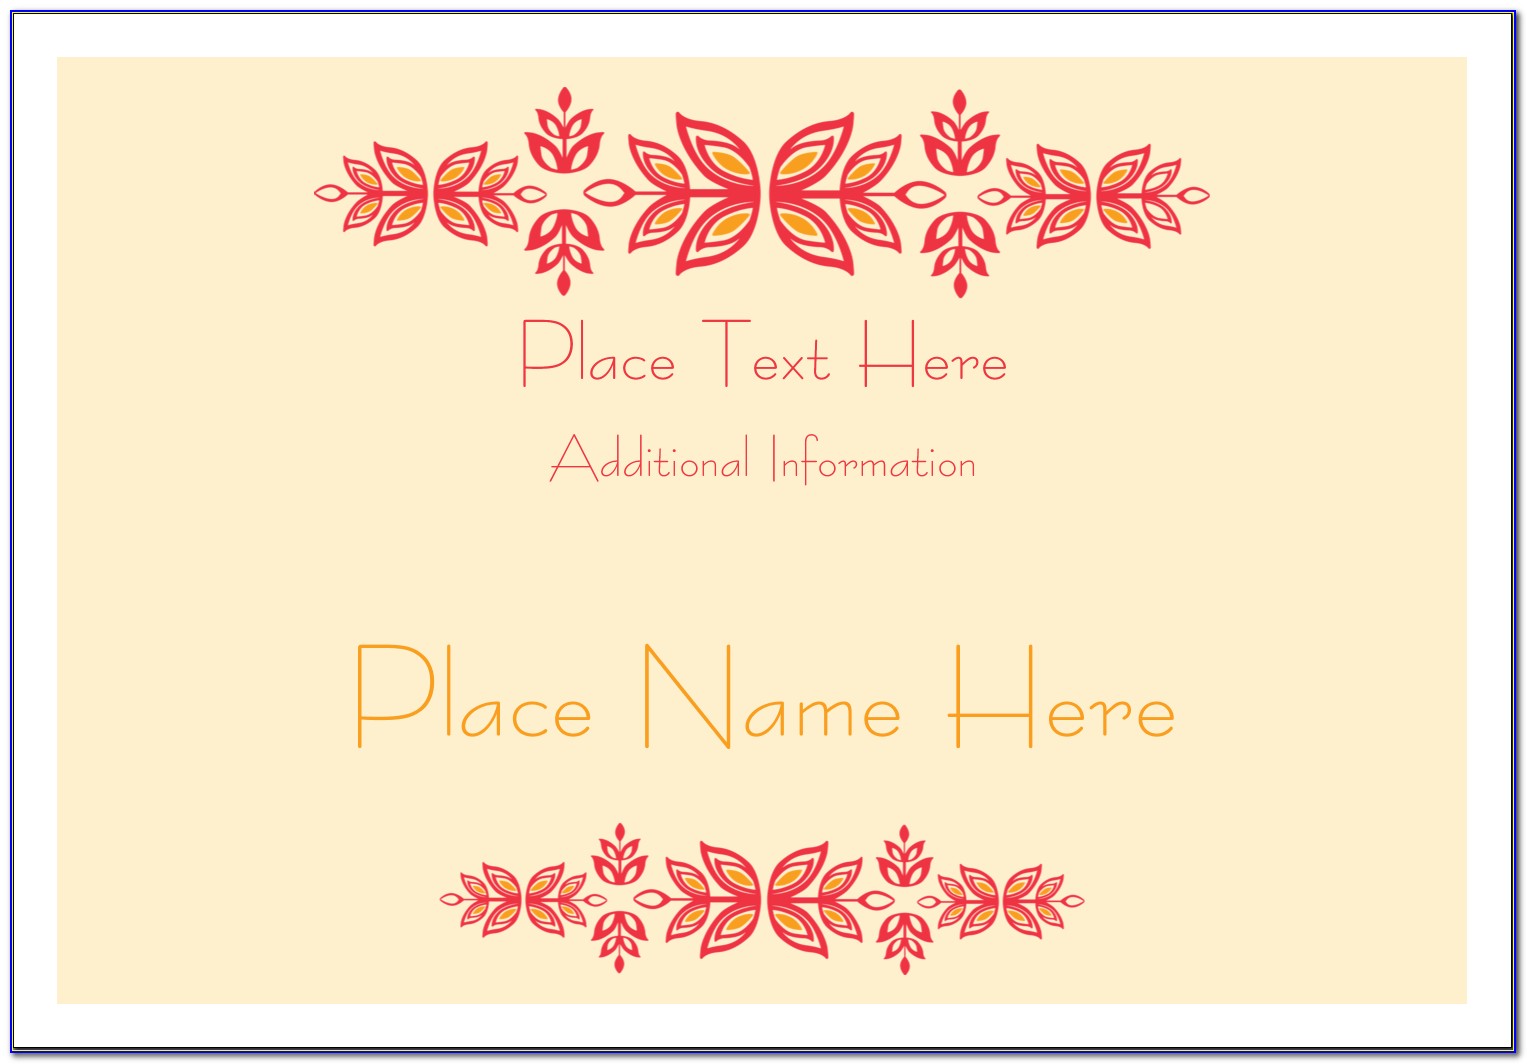 Avery Name Badges Template 5395